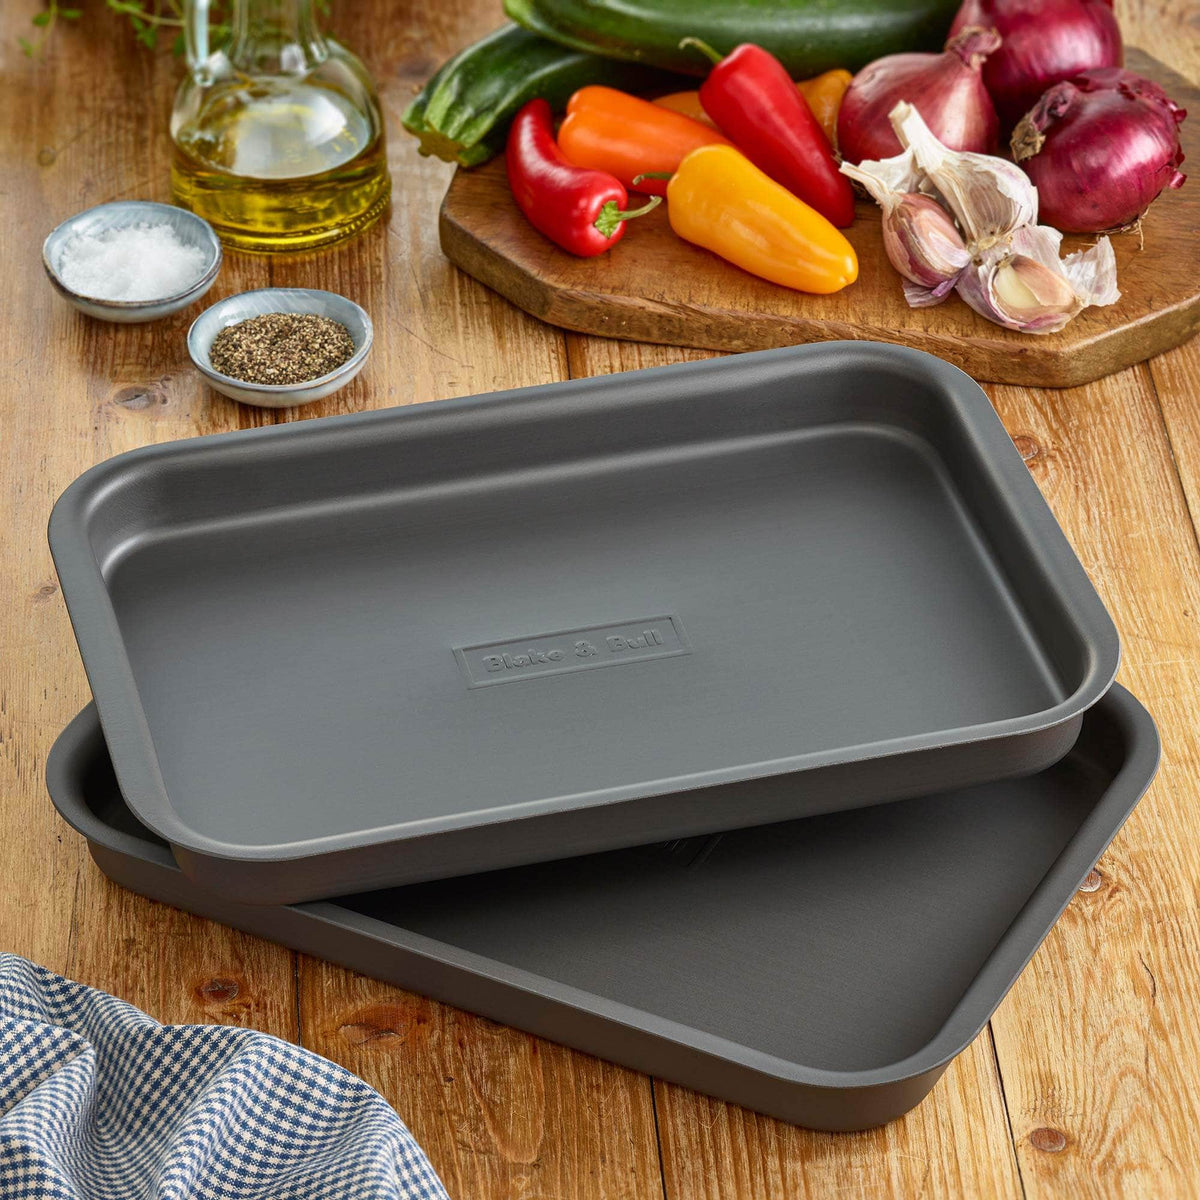 &#39;Fits on runners&#39; tray bake for use with Aga range cookers &#39;half oven&#39; size